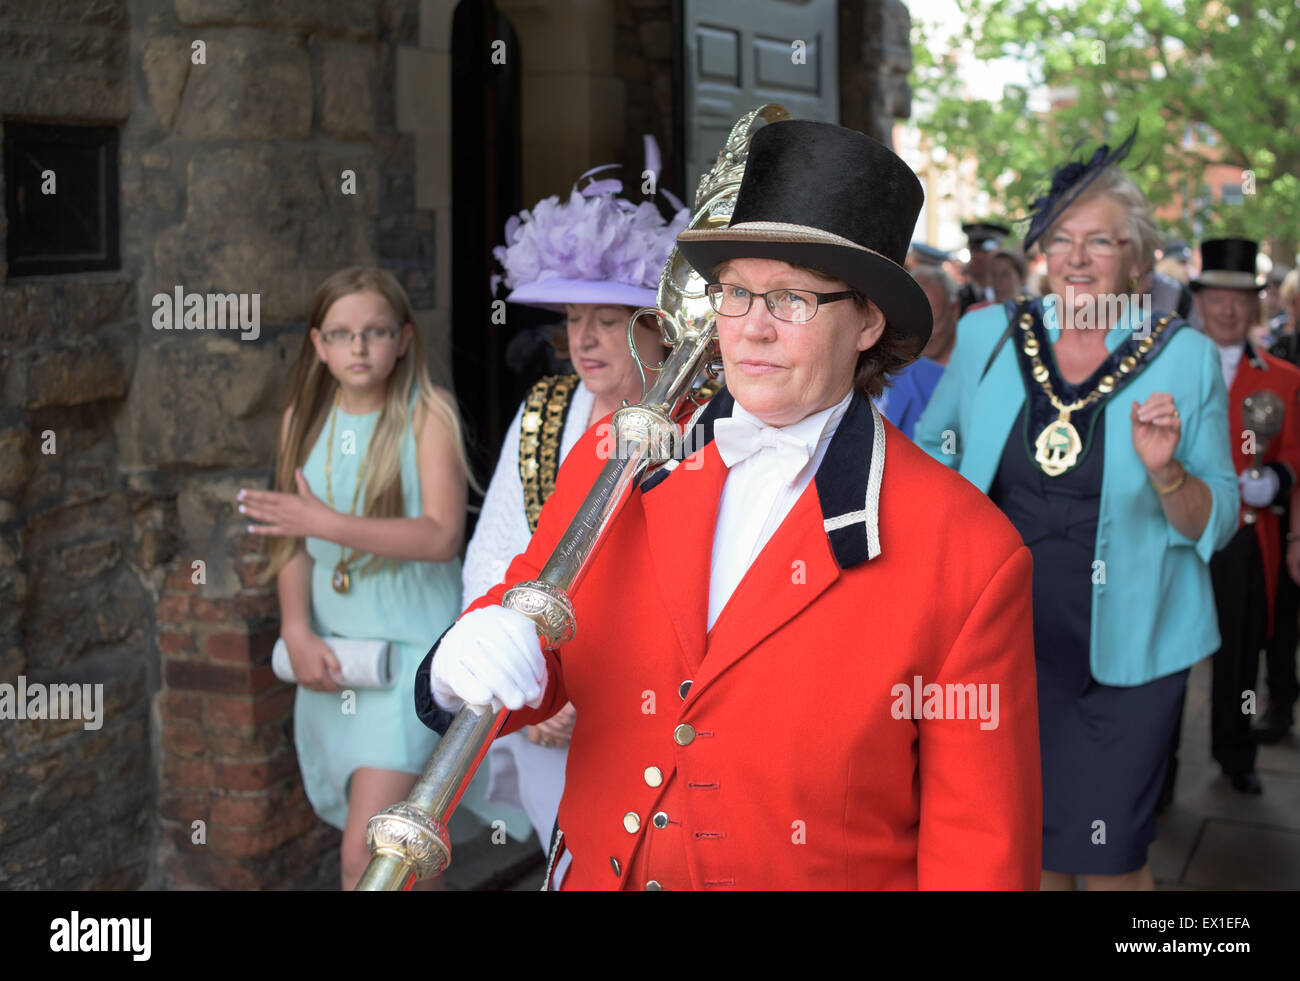 Nottingham, UK. 04th July, 2015. Councillor Jackie Morris is sworn in as the new Lord Mayor, Also Mohammed Saghir is sworn in as Sheriff of Nottingham.The procession left city council at 11.00am to arrive the castle for 11.15 .On arrival at the Castle, The Town Crier will read an announcement on behalf of the Lord Mayor, who will knock on the Castle gates to demand entry.a ceremony (at approximately 11:45am) known as 'Mayor Making', which will include a short service and blessing for the city of Nottingham. Credit:  IFIMAGE/Alamy Live News Stock Photo